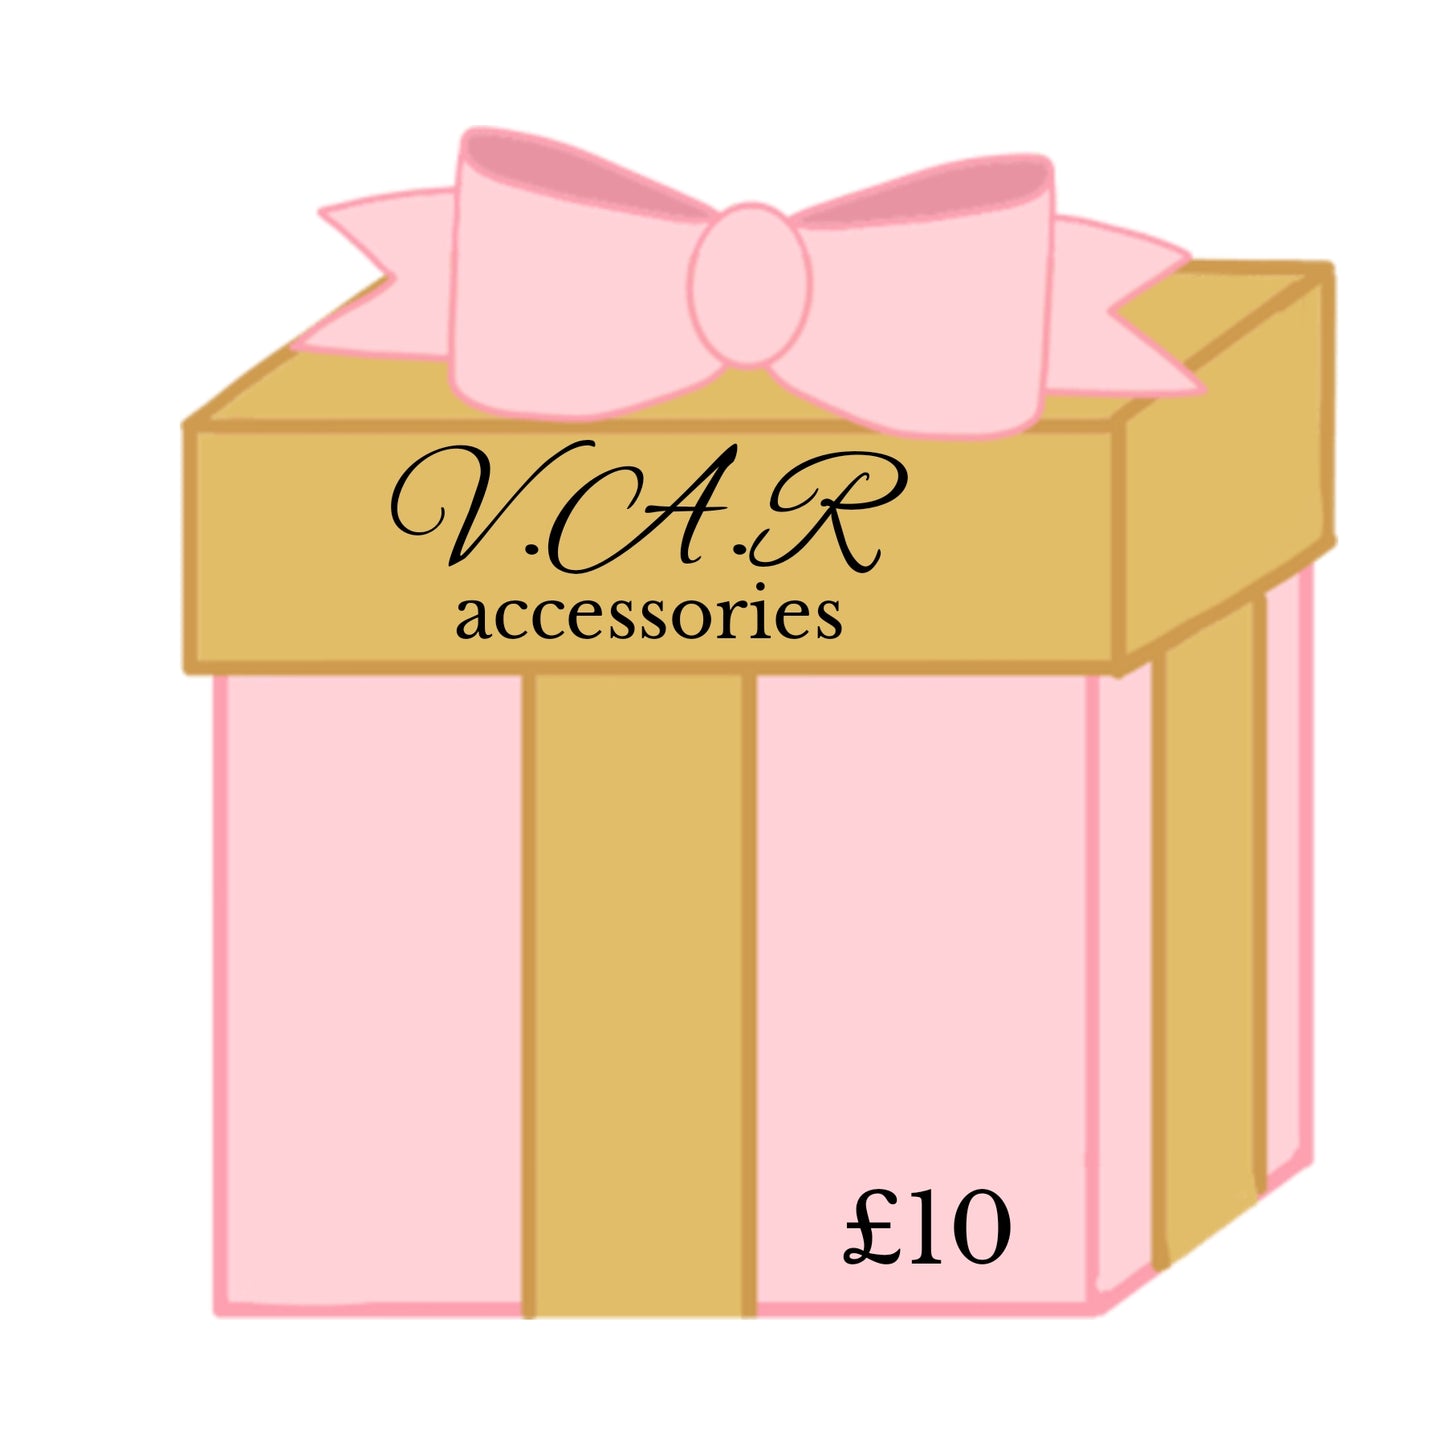 V.A.R Accessories Gift Card